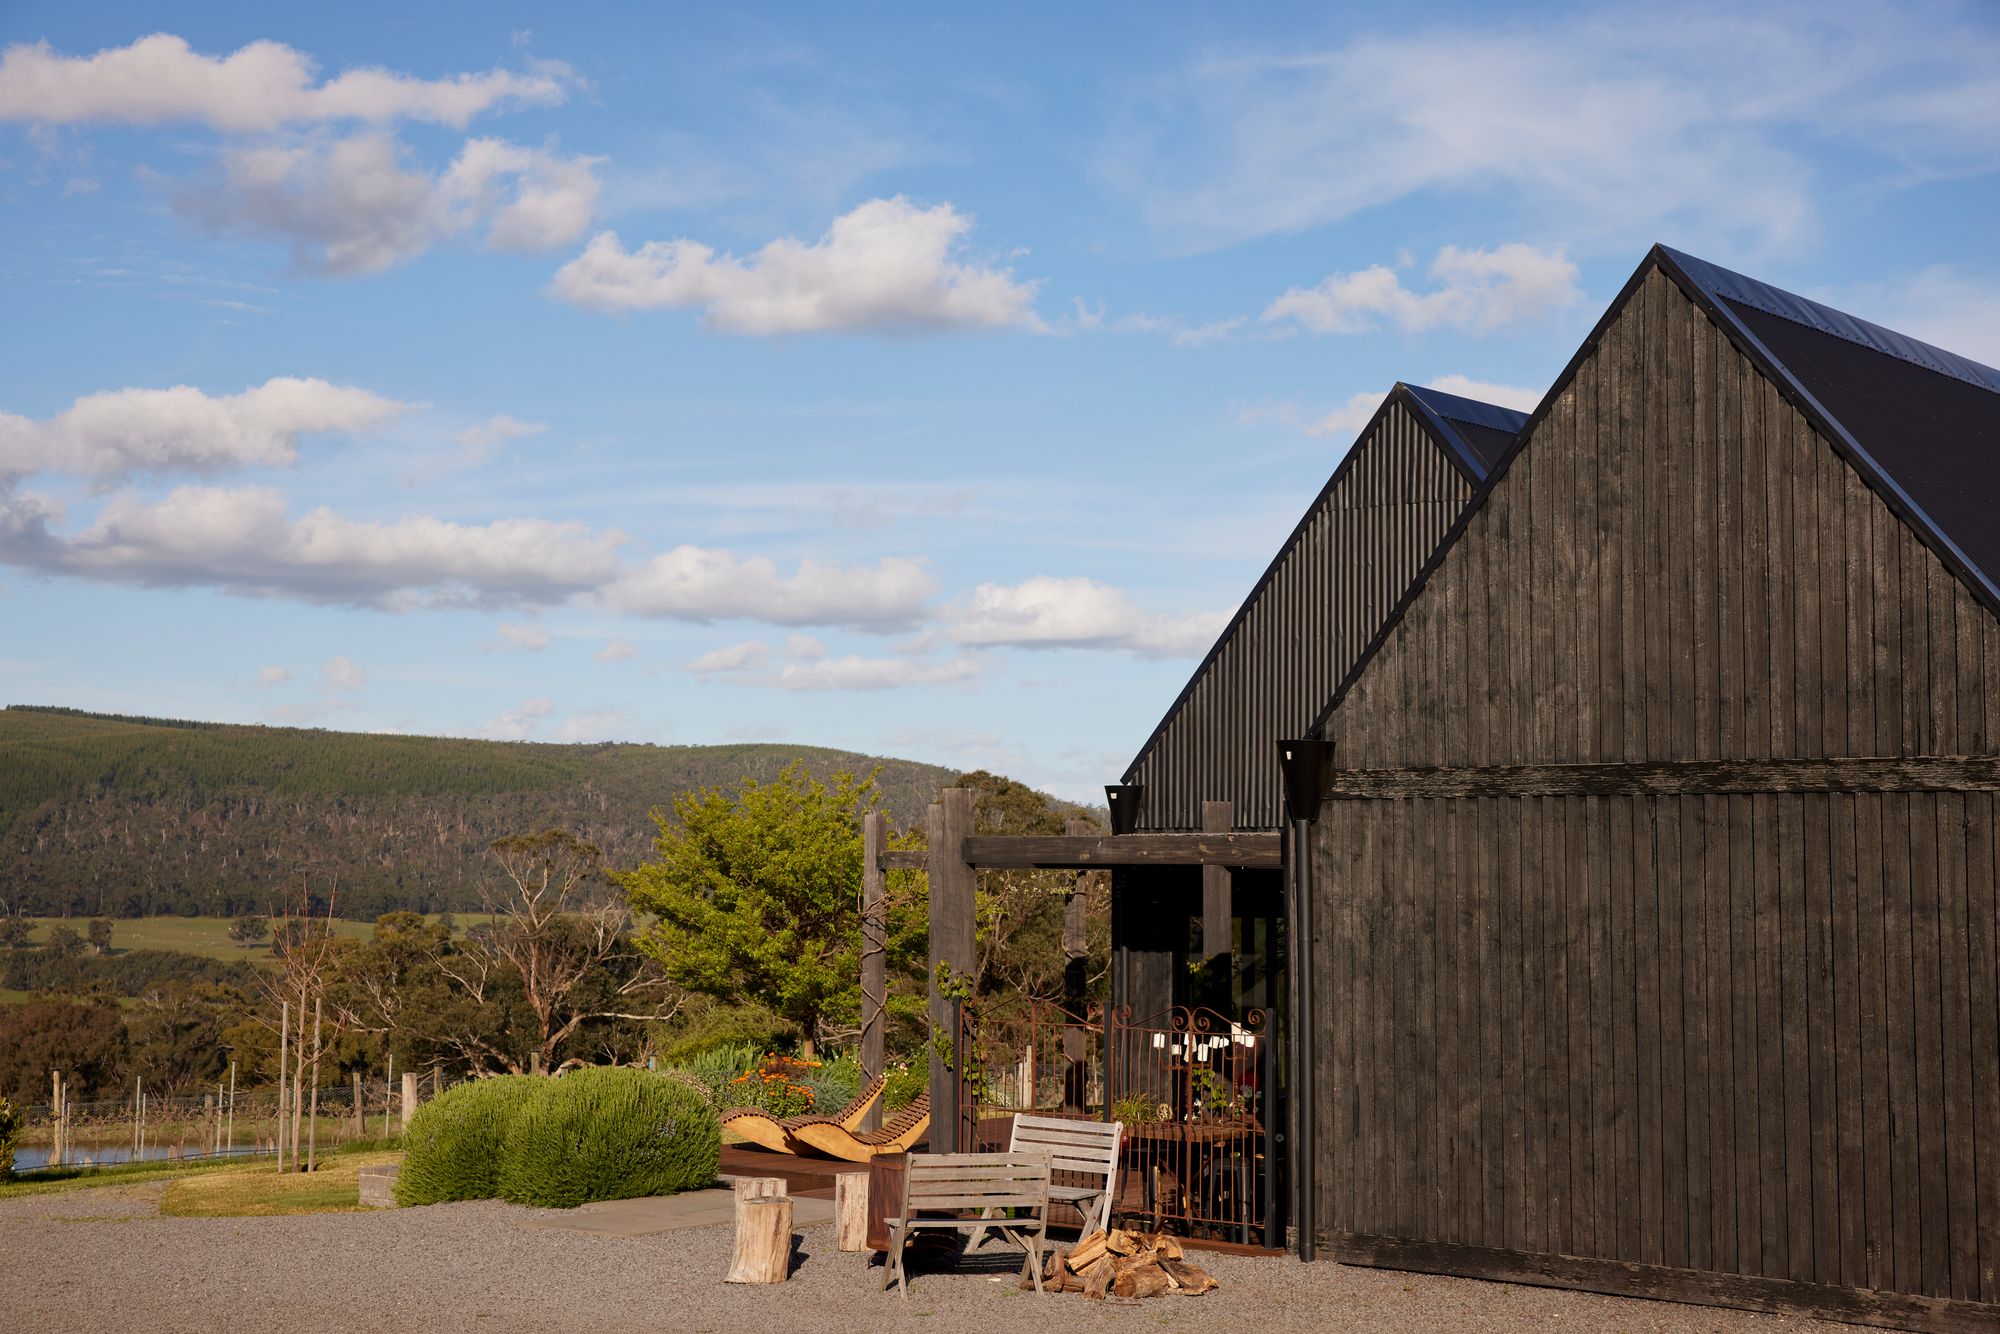 An exterior shot of The Glut Farm showing the dark timber cladding that covers the two pavilions